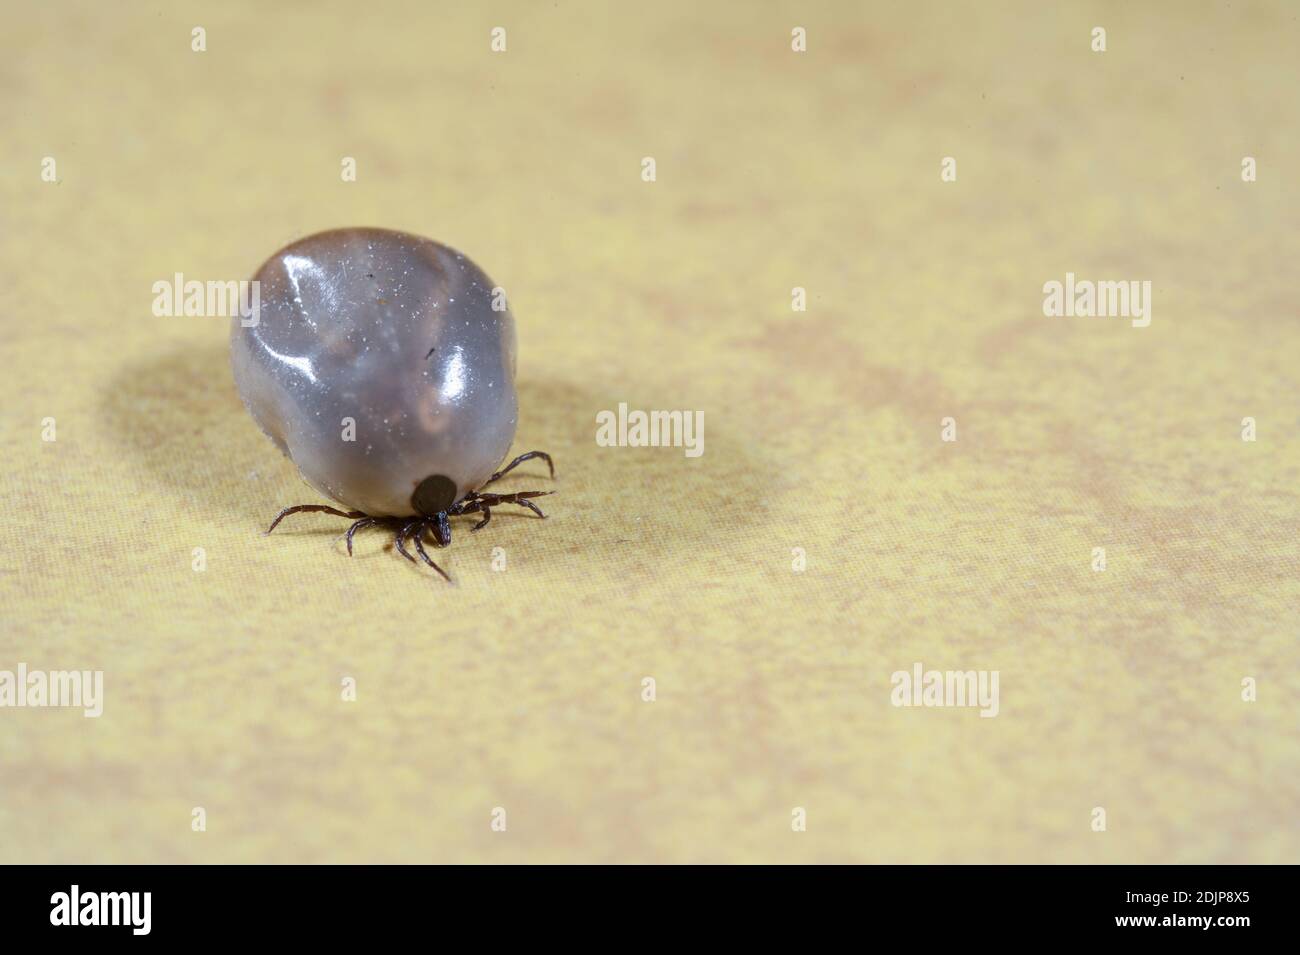 Castor bean tick (Ixodes ricinus) full of blood crawling on a floor Stock Photo